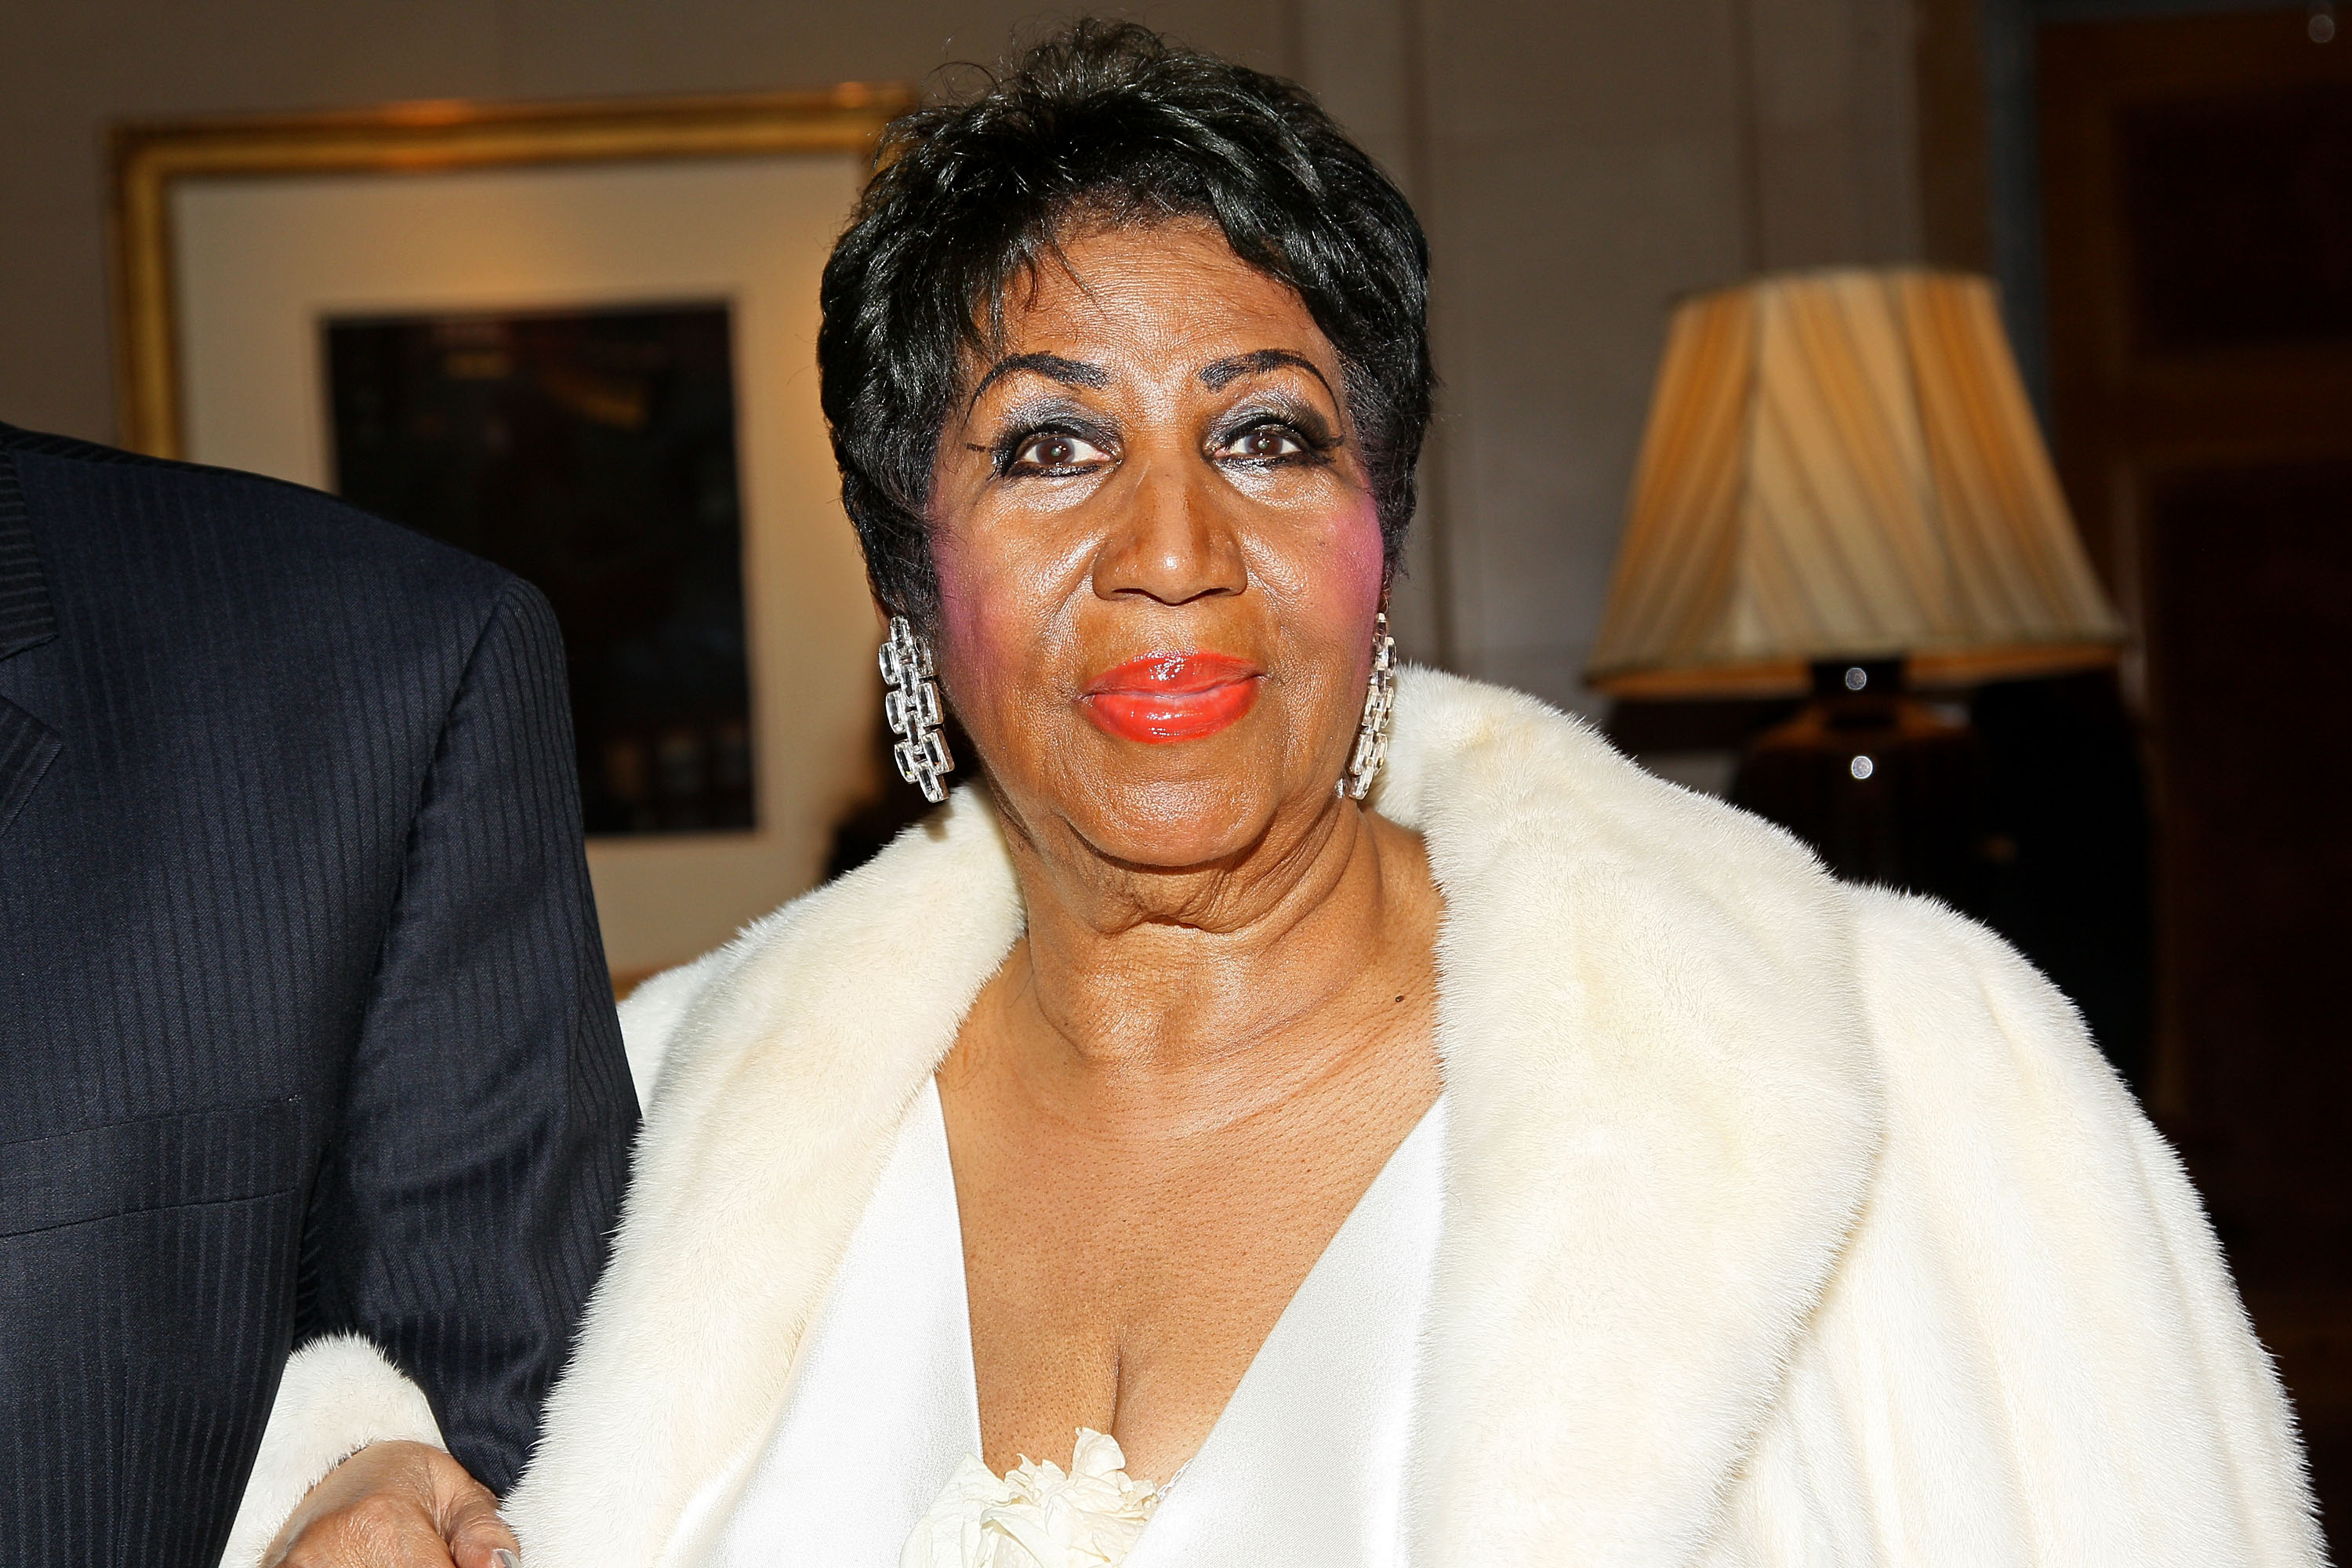 Aretha Franklin attends her 74th Birthday Celebration at The Ritz Carlton Hotel on April 14, 2016 in New York City. (Steve Mack—Getty Images)